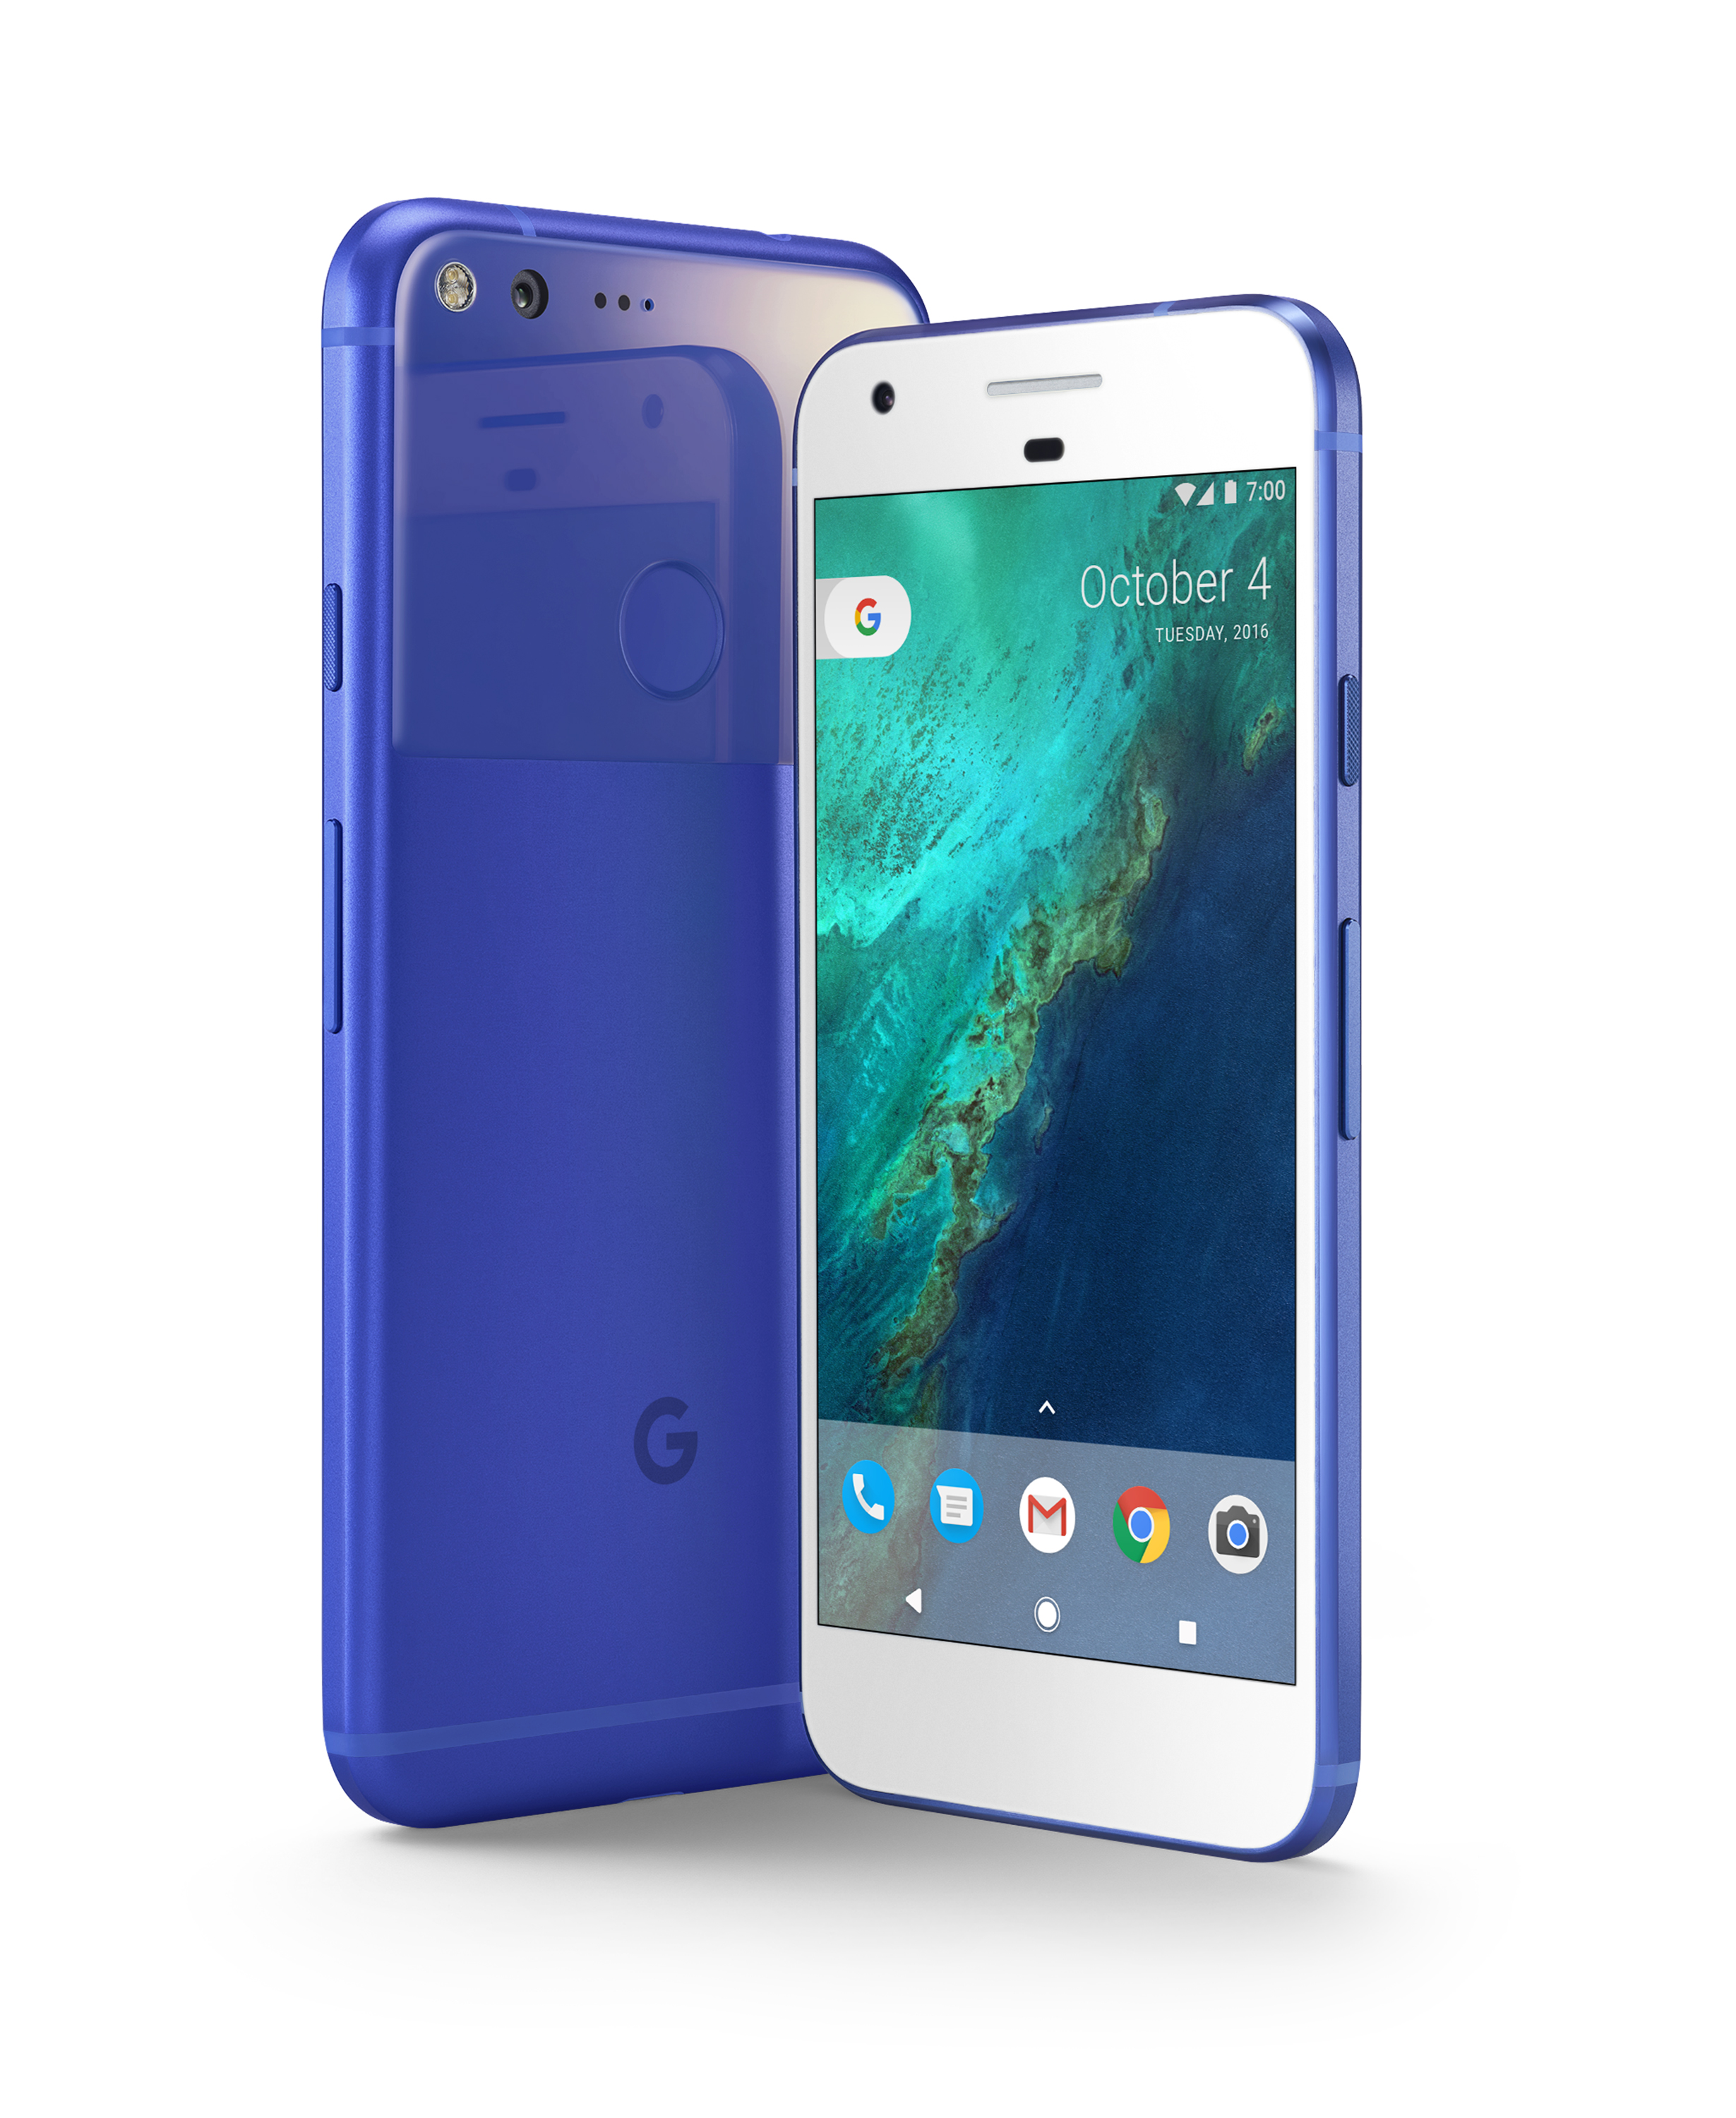 Tech review: Googleís entry into smartphone design has some very cool features